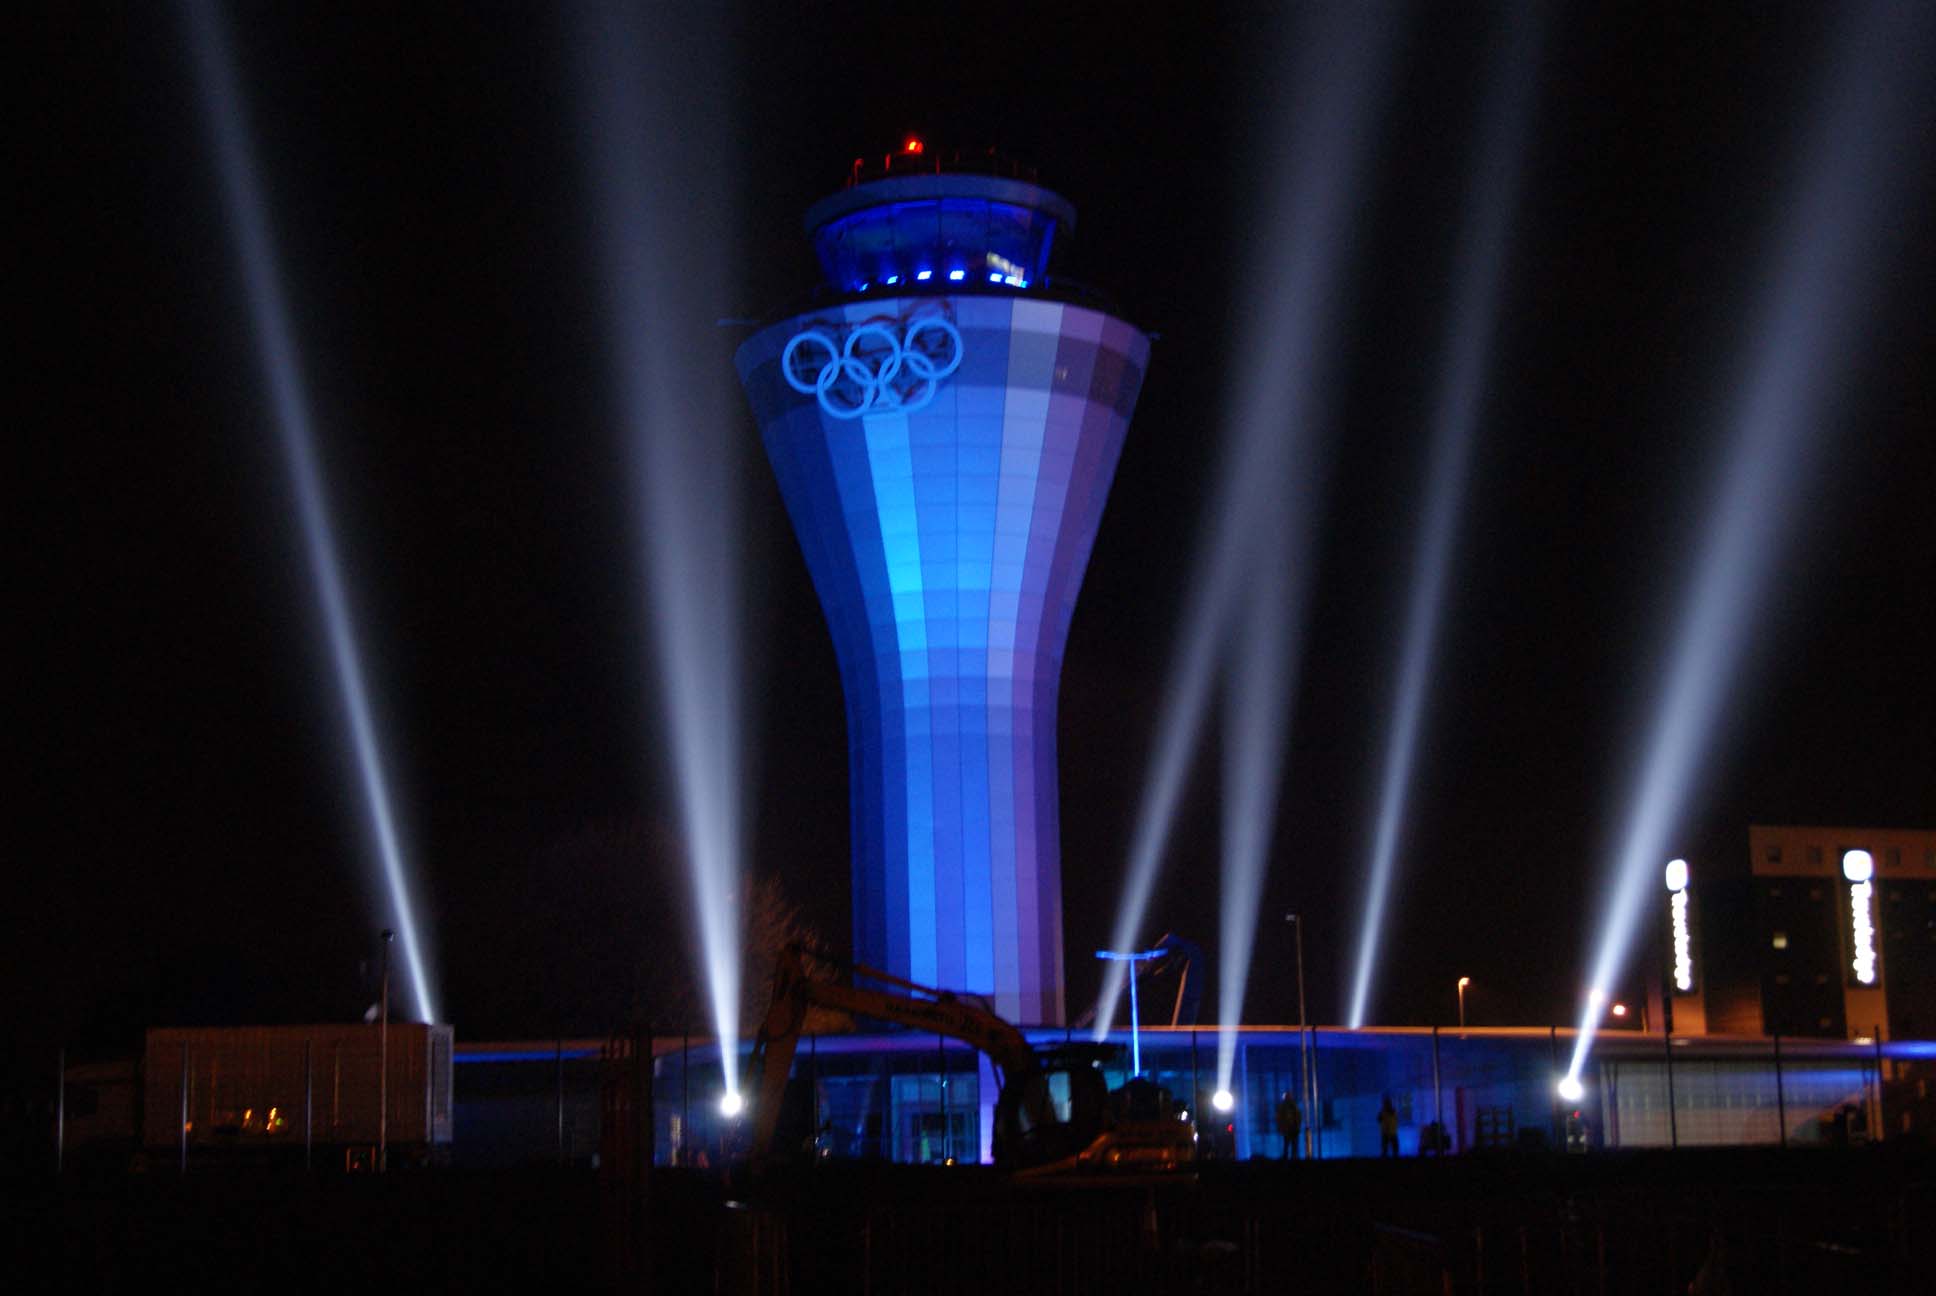 Birmingham airport reveal the Giant welcoming Olympic rings a massive searchlight show